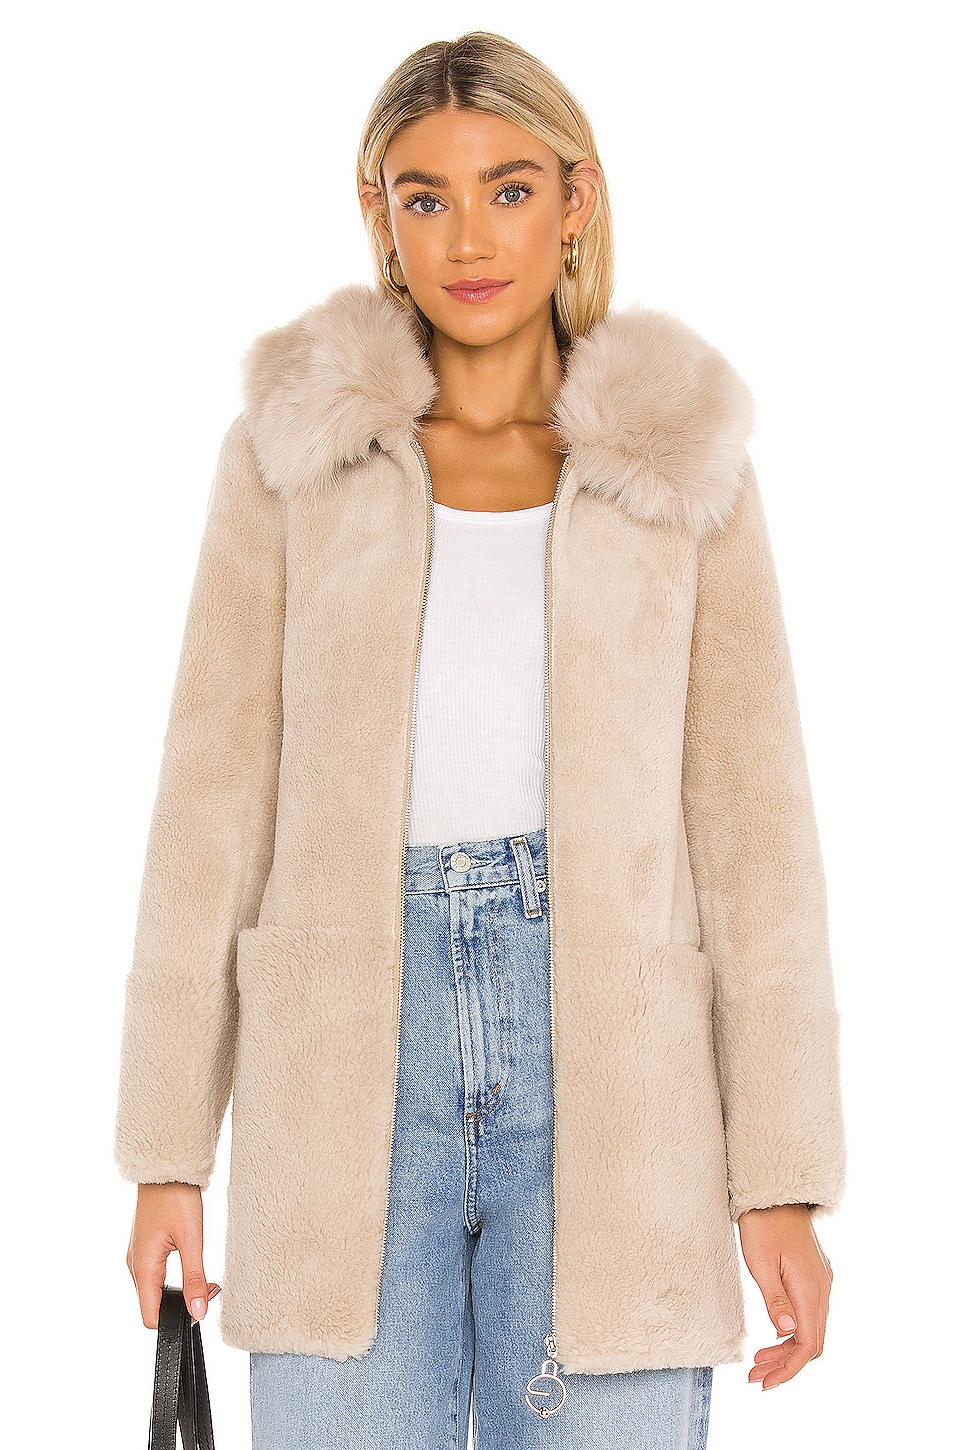 Bubish Molly Faux Fur Jacket in Light Beige | REVOLVE